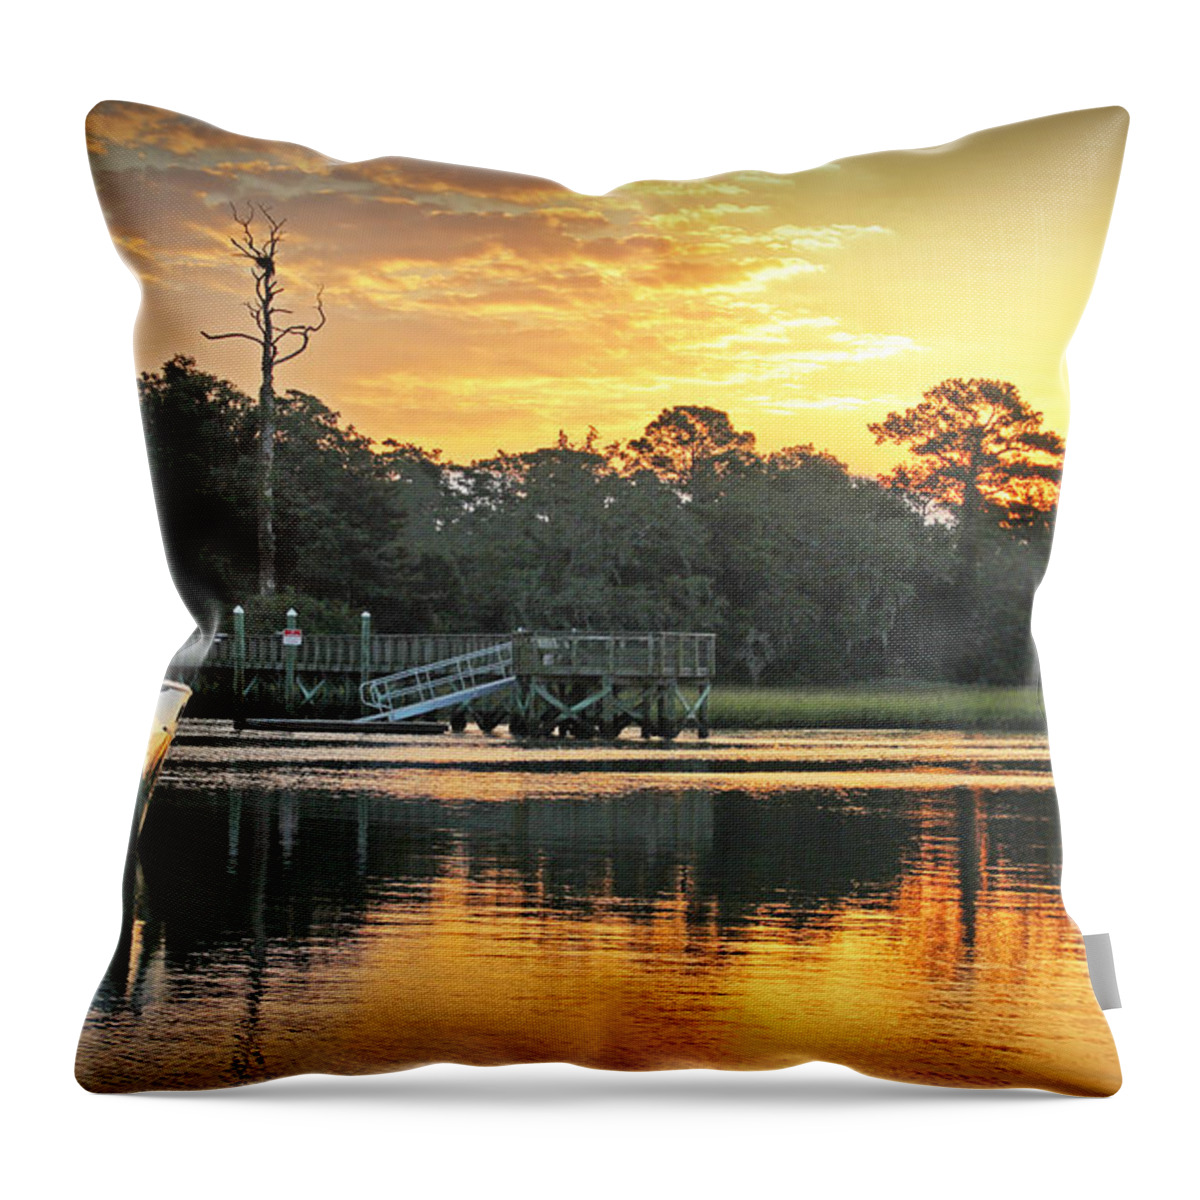  Throw Pillow featuring the photograph Simple Pleasures by Phil Mancuso